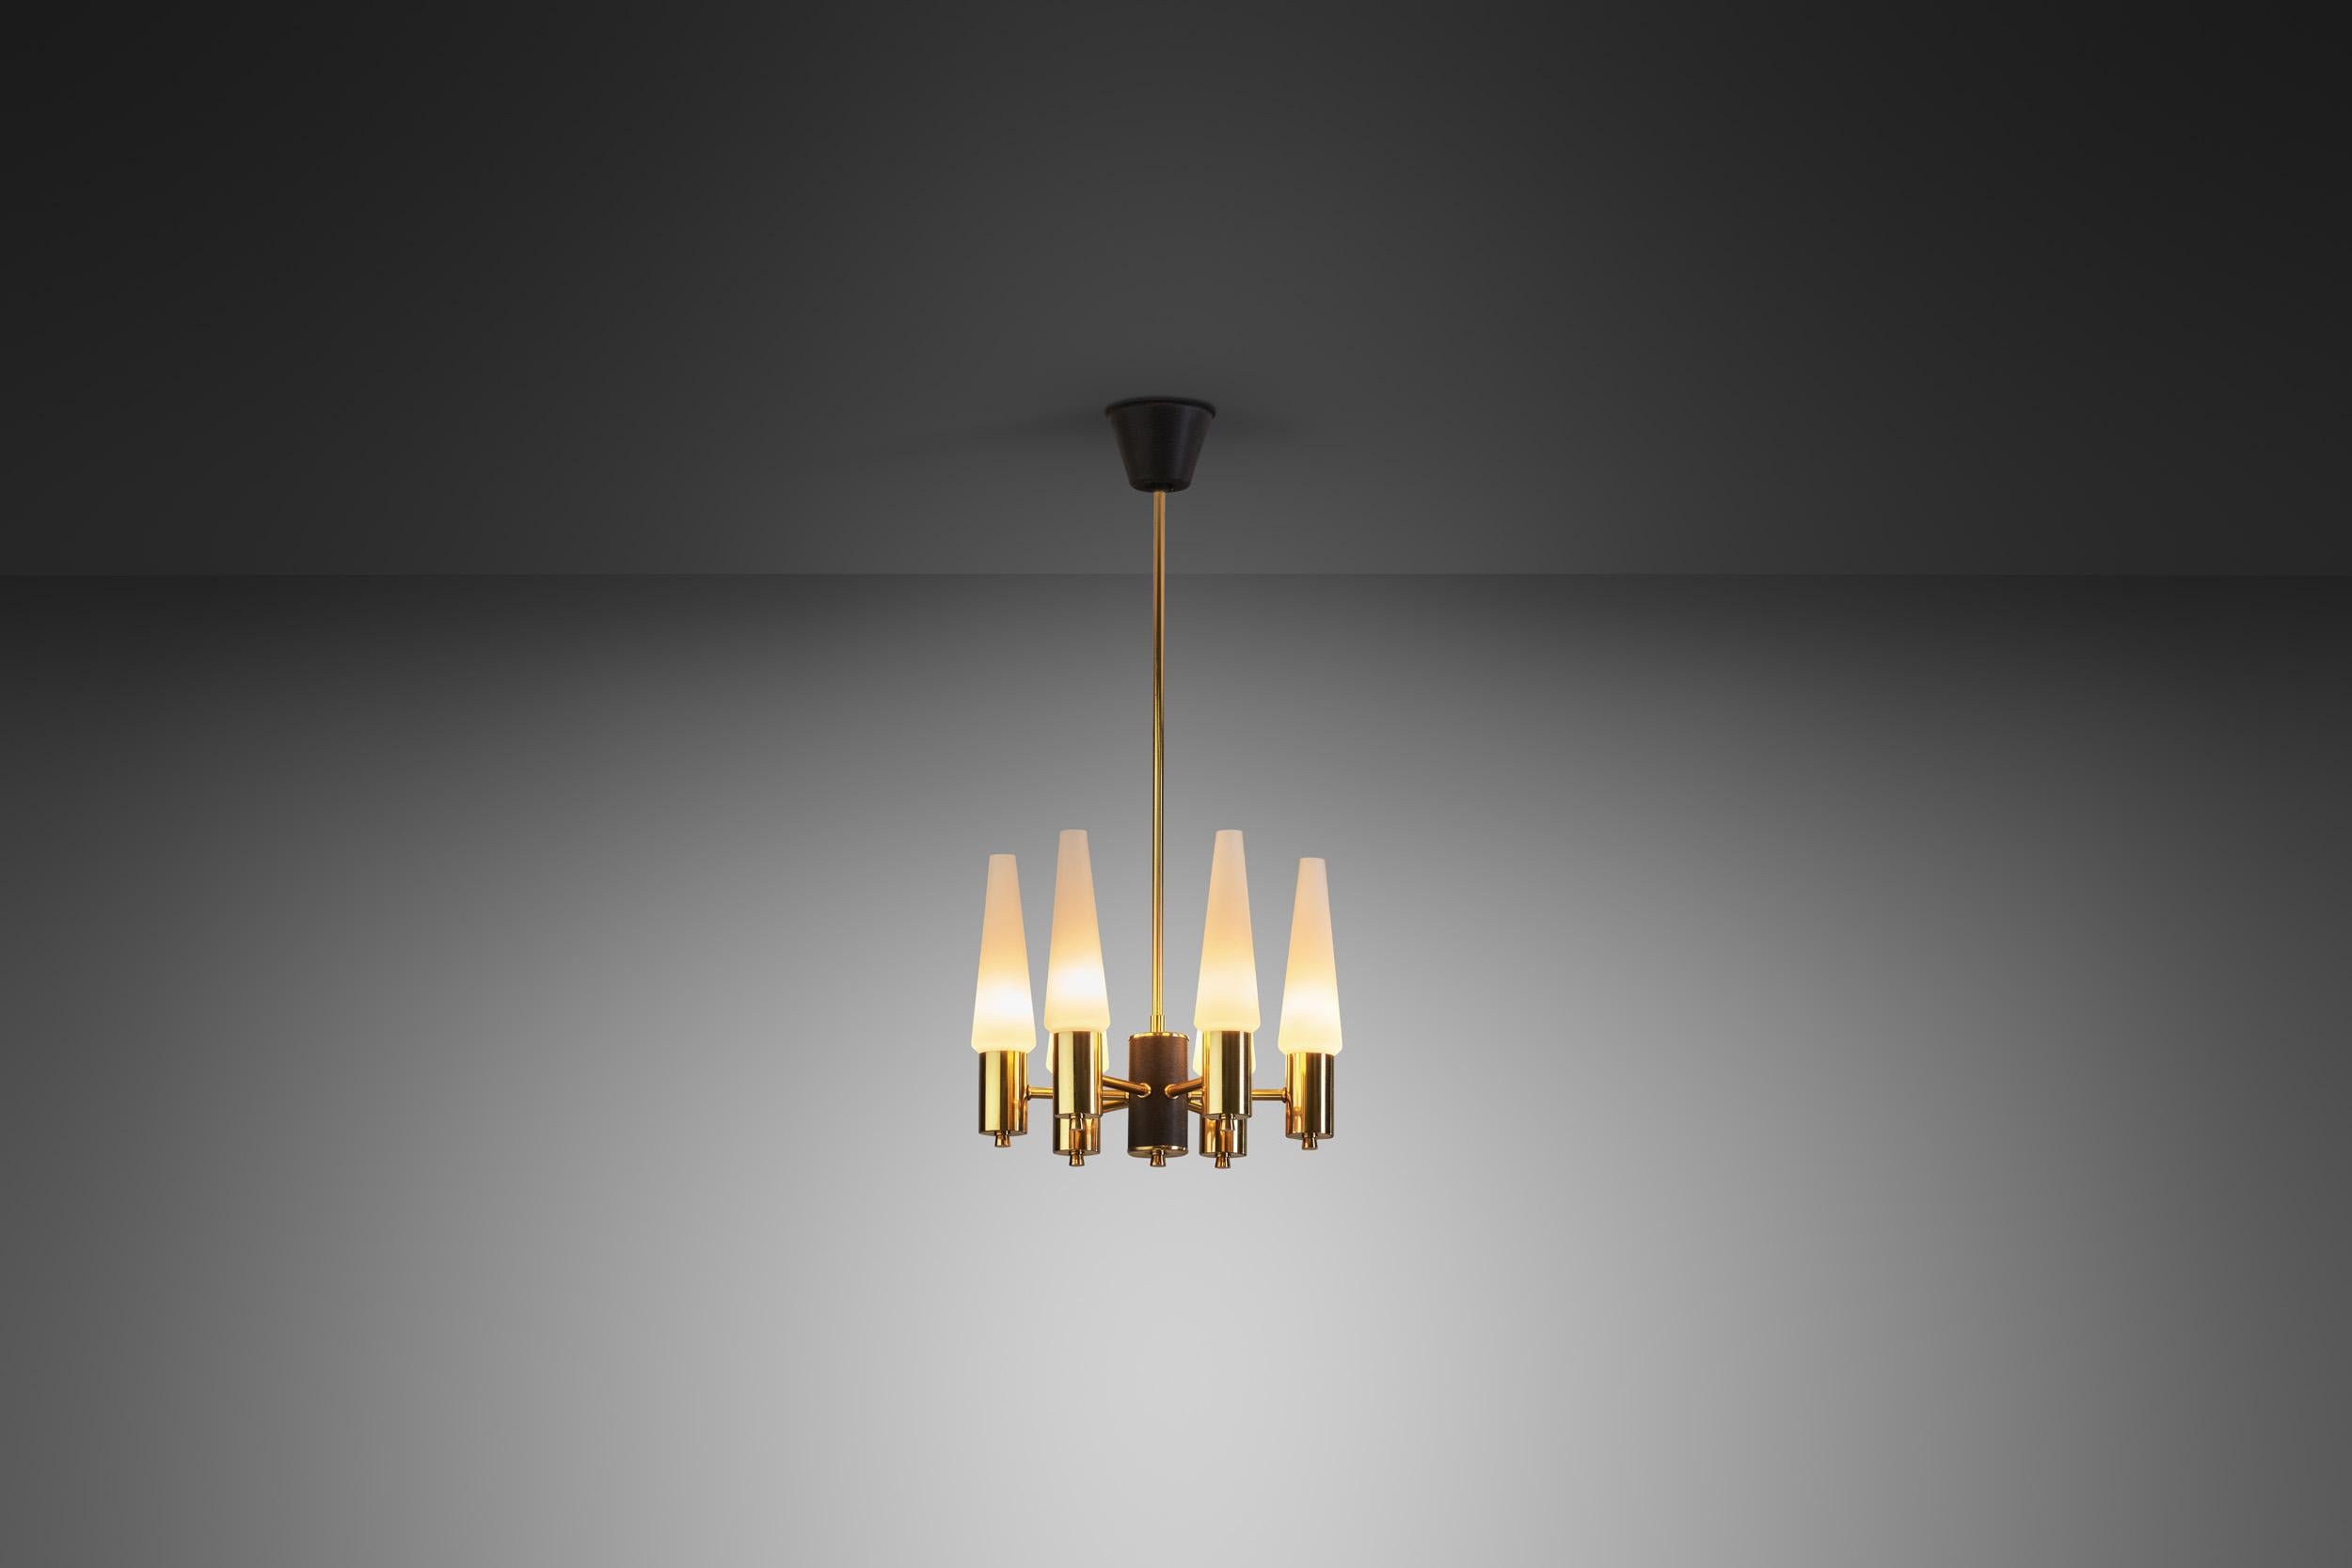 This beautiful chandelier is from the heyday of post-war Modernism, an era that brought Scandinavian design into blossom. The period saw the revival of an elementary, undecorated visual language, emphasizing sleek design as this marvellous, brass